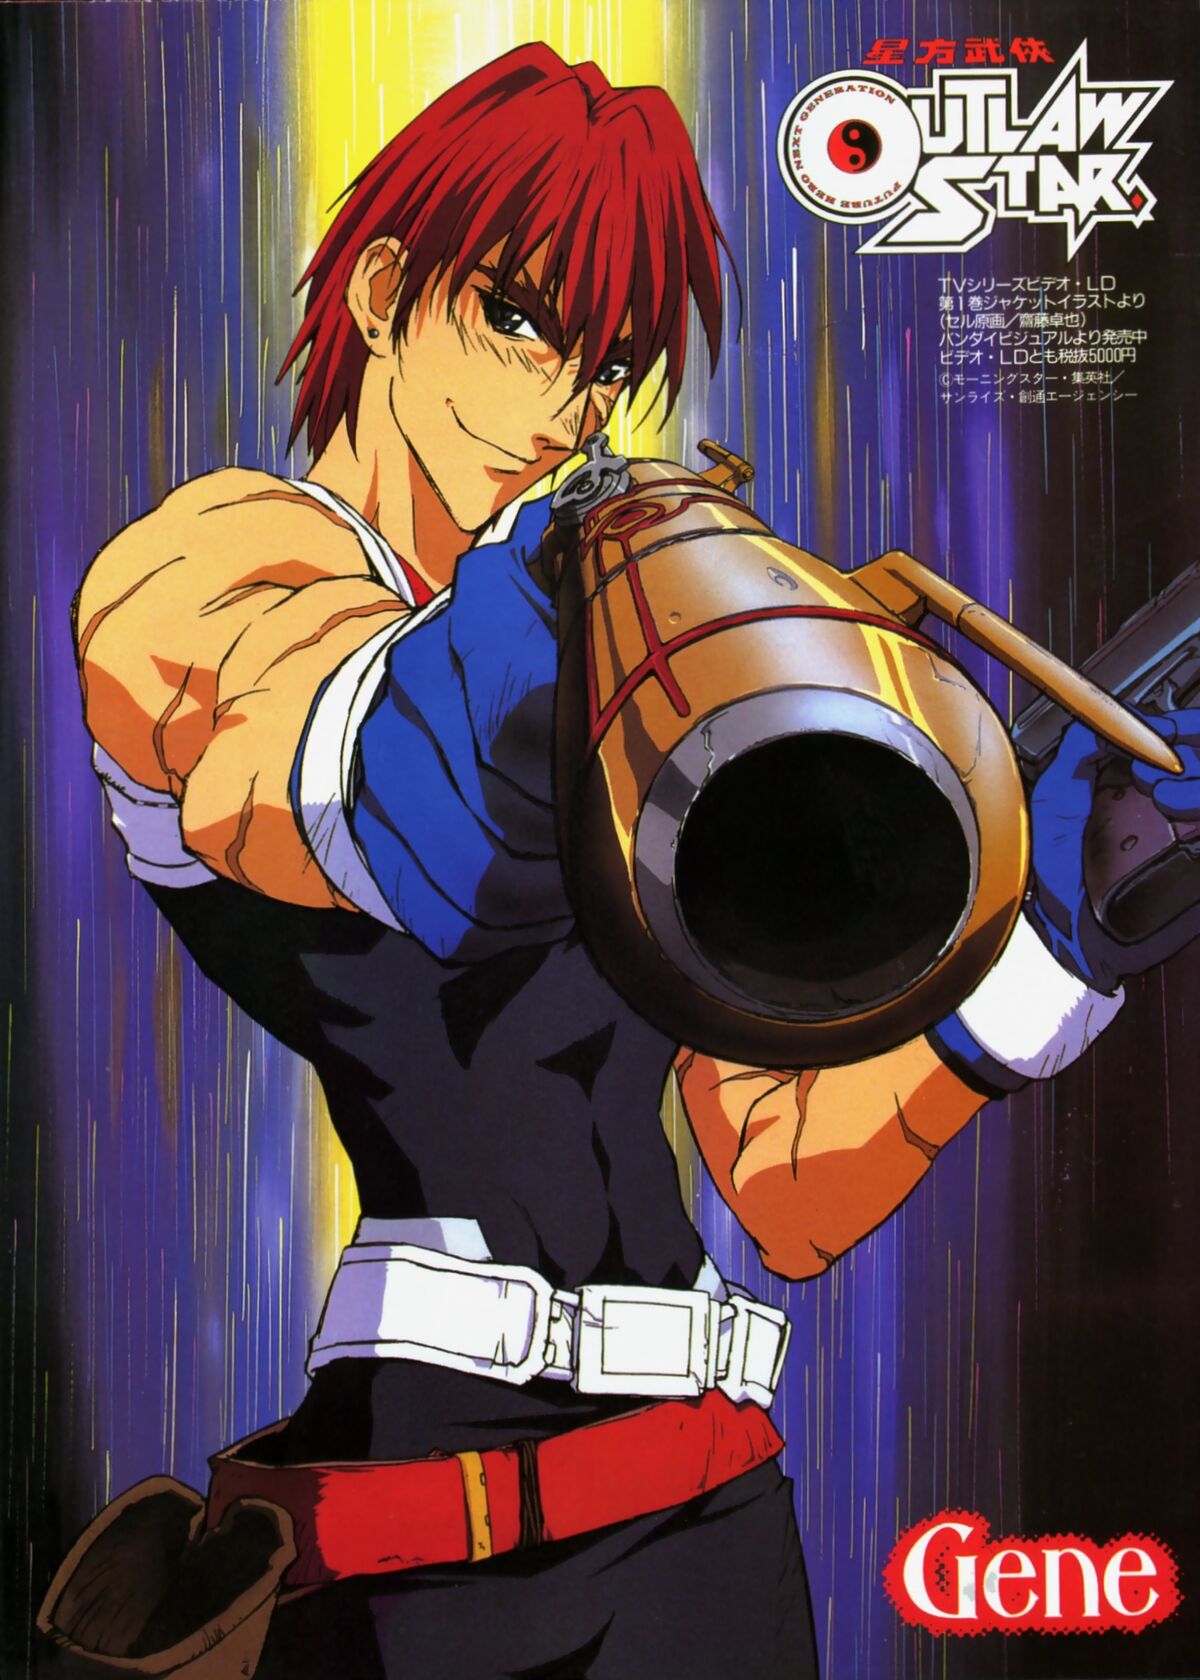 Outlaw Star The Complete Series bluray  Digital2018  Target